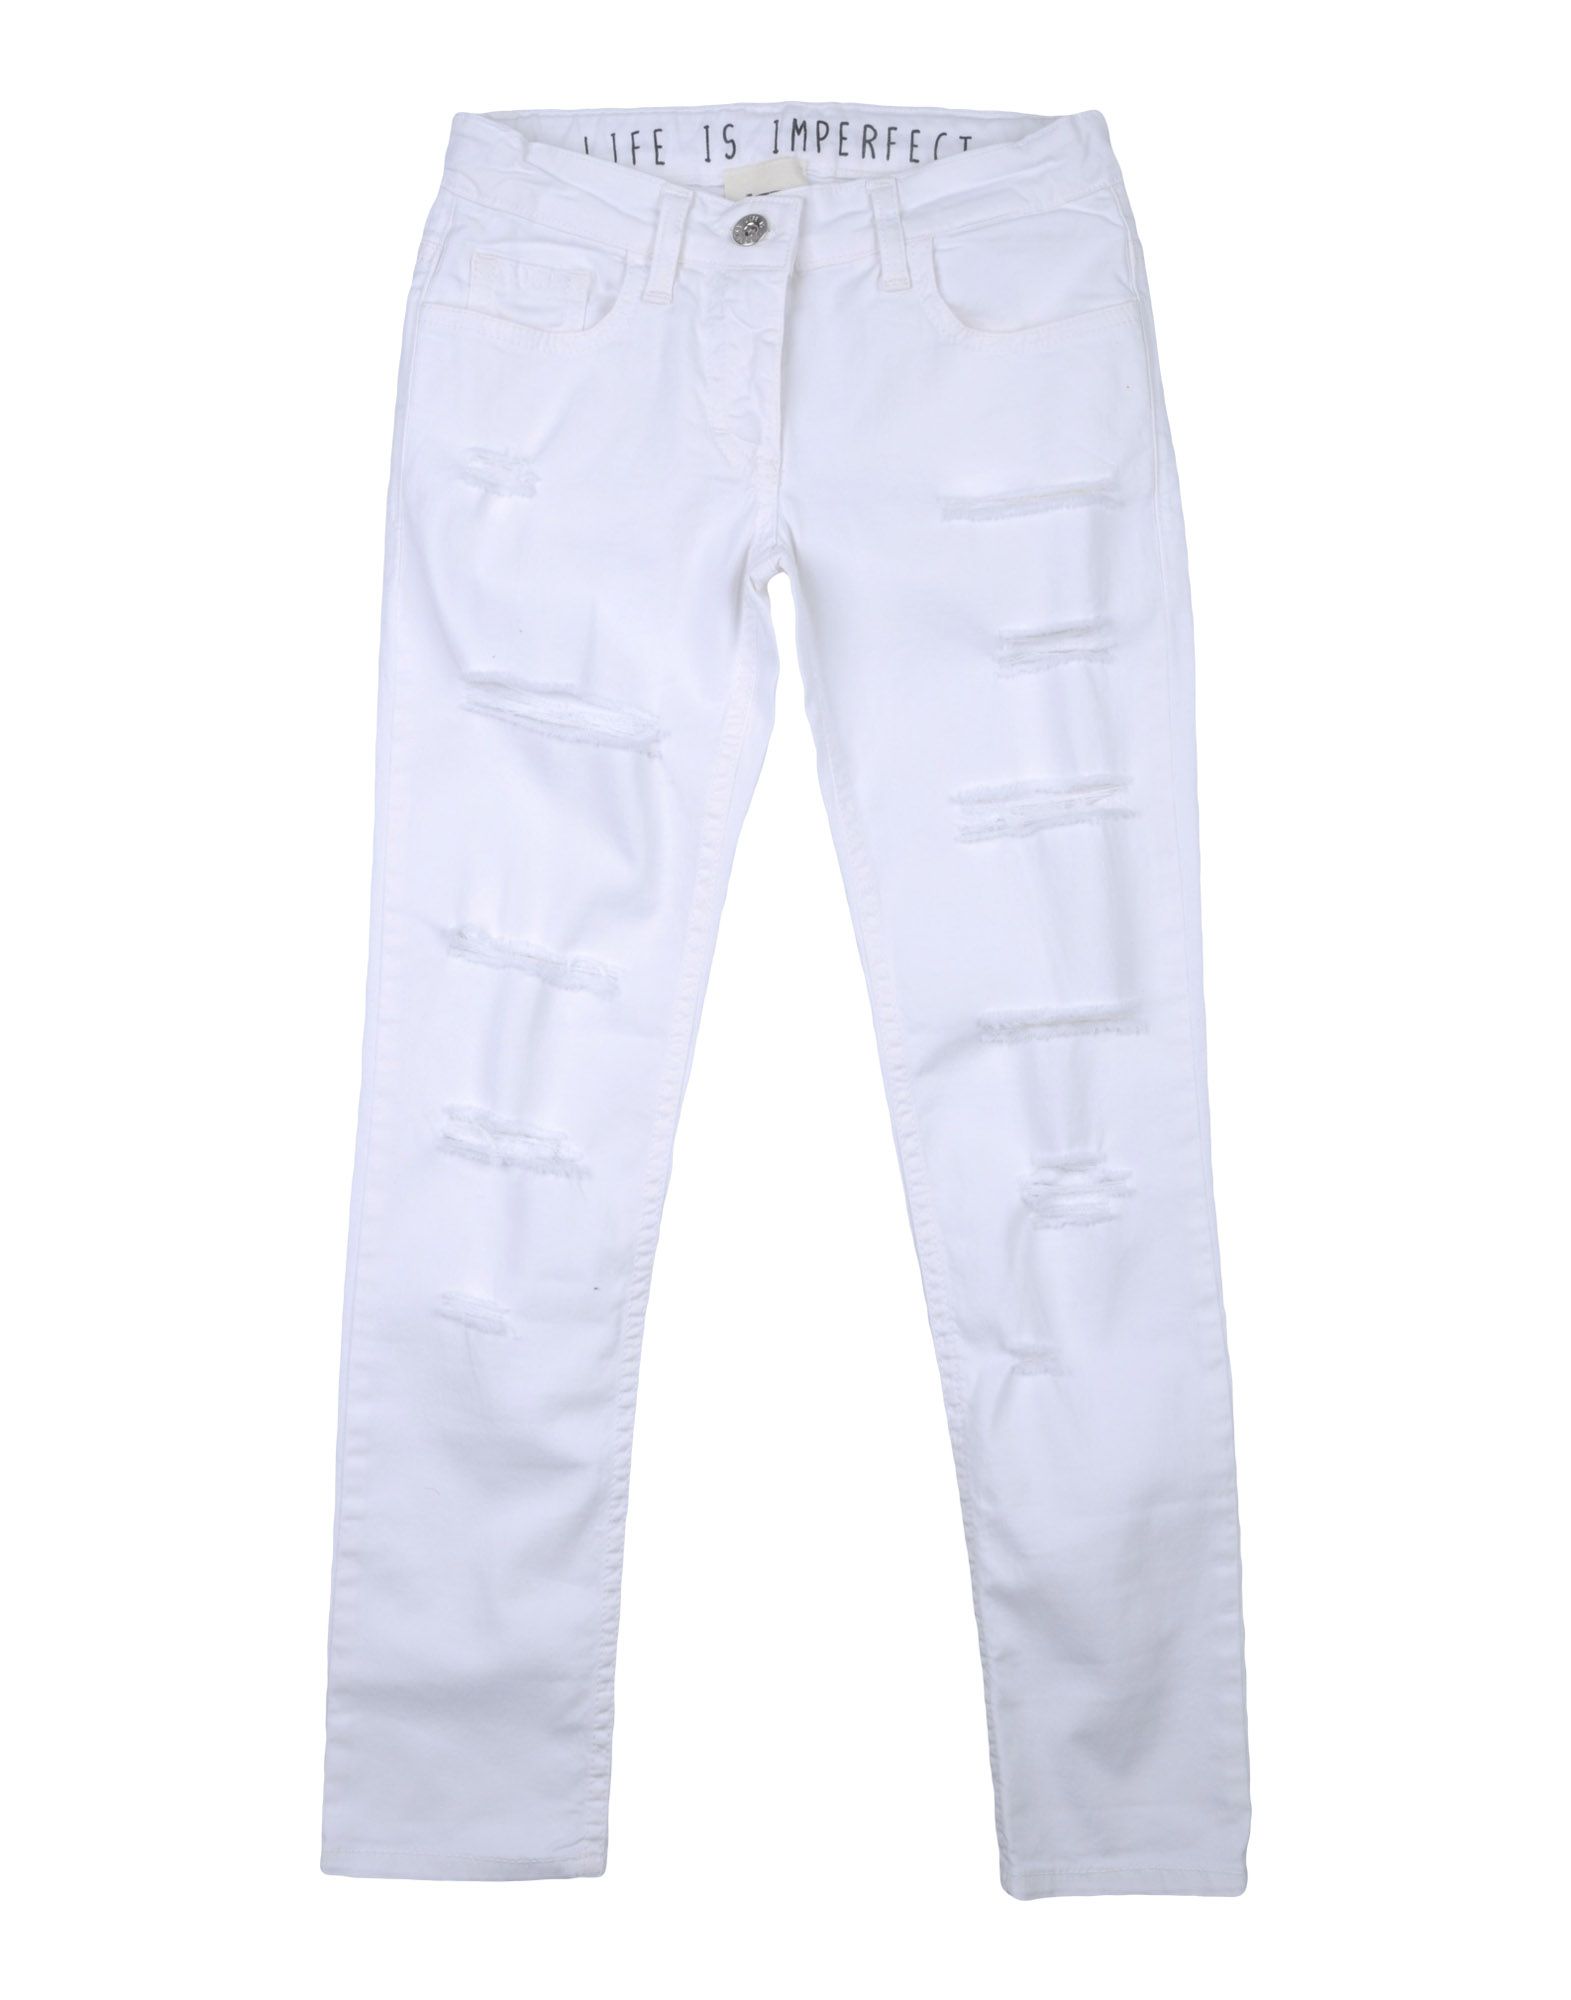 !m?erfect Kids'  Casual Pants In White